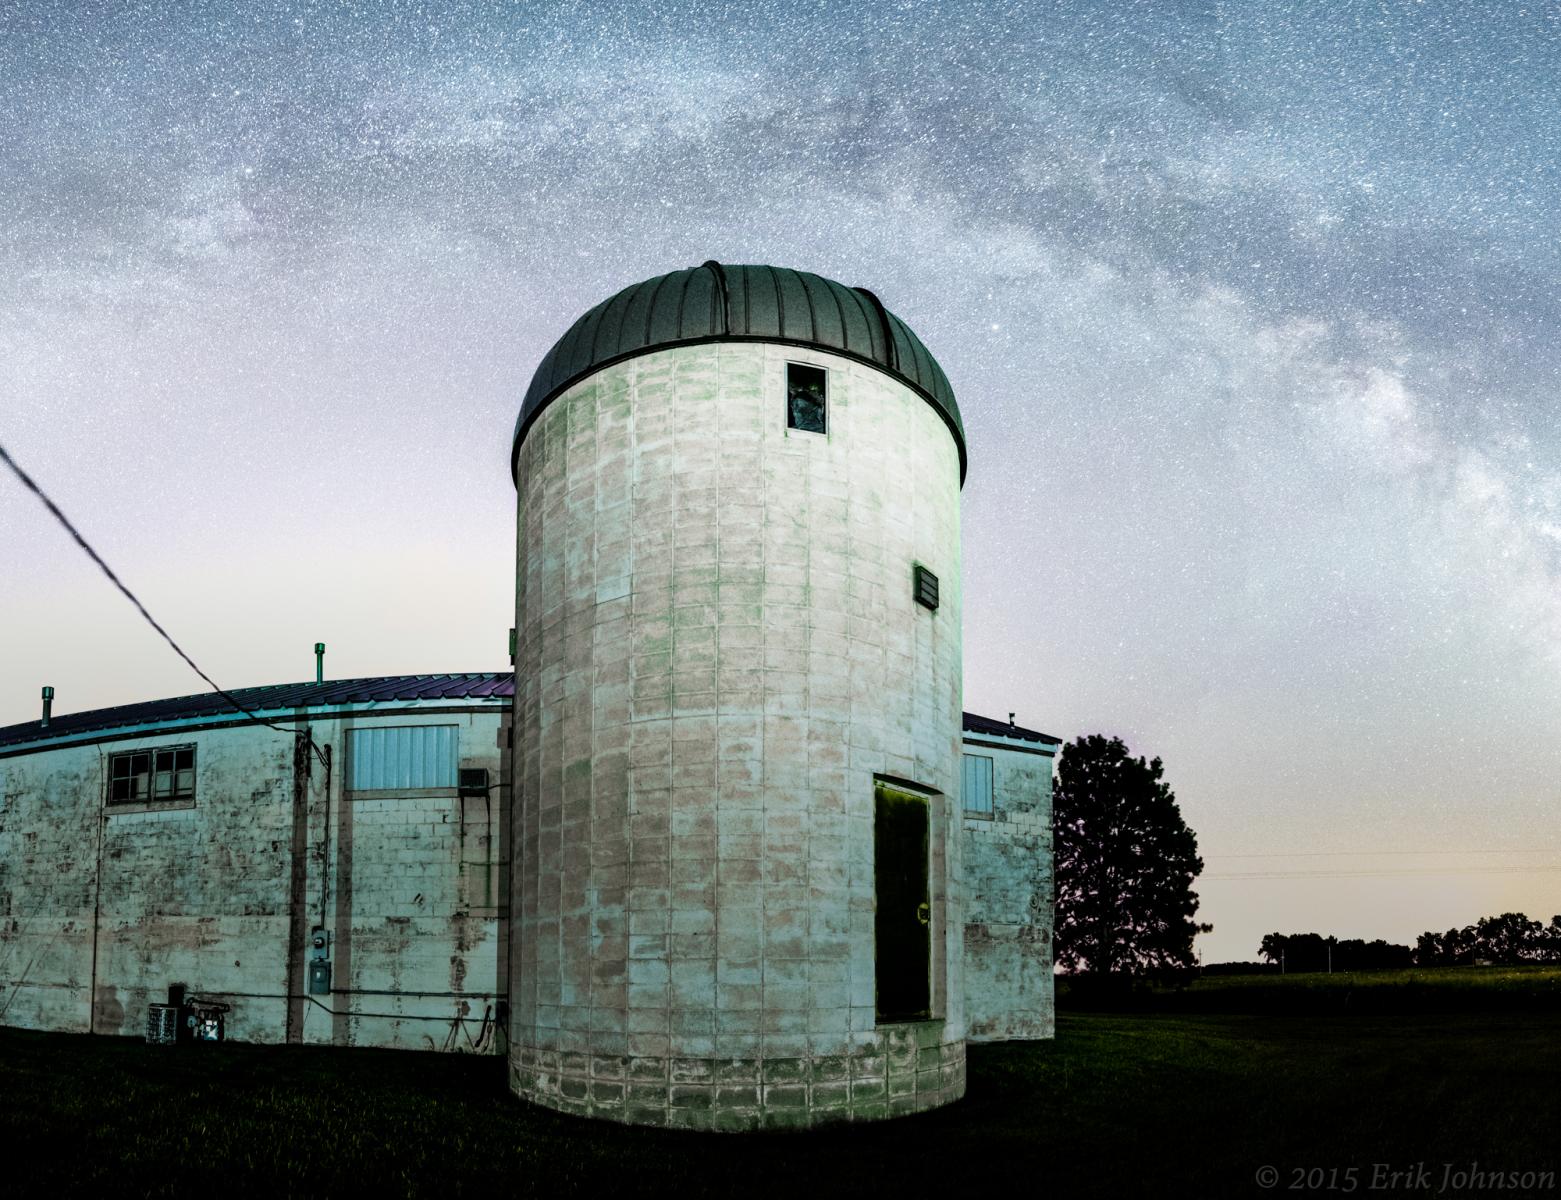 Milky Way in the sky above Behlen Observatory